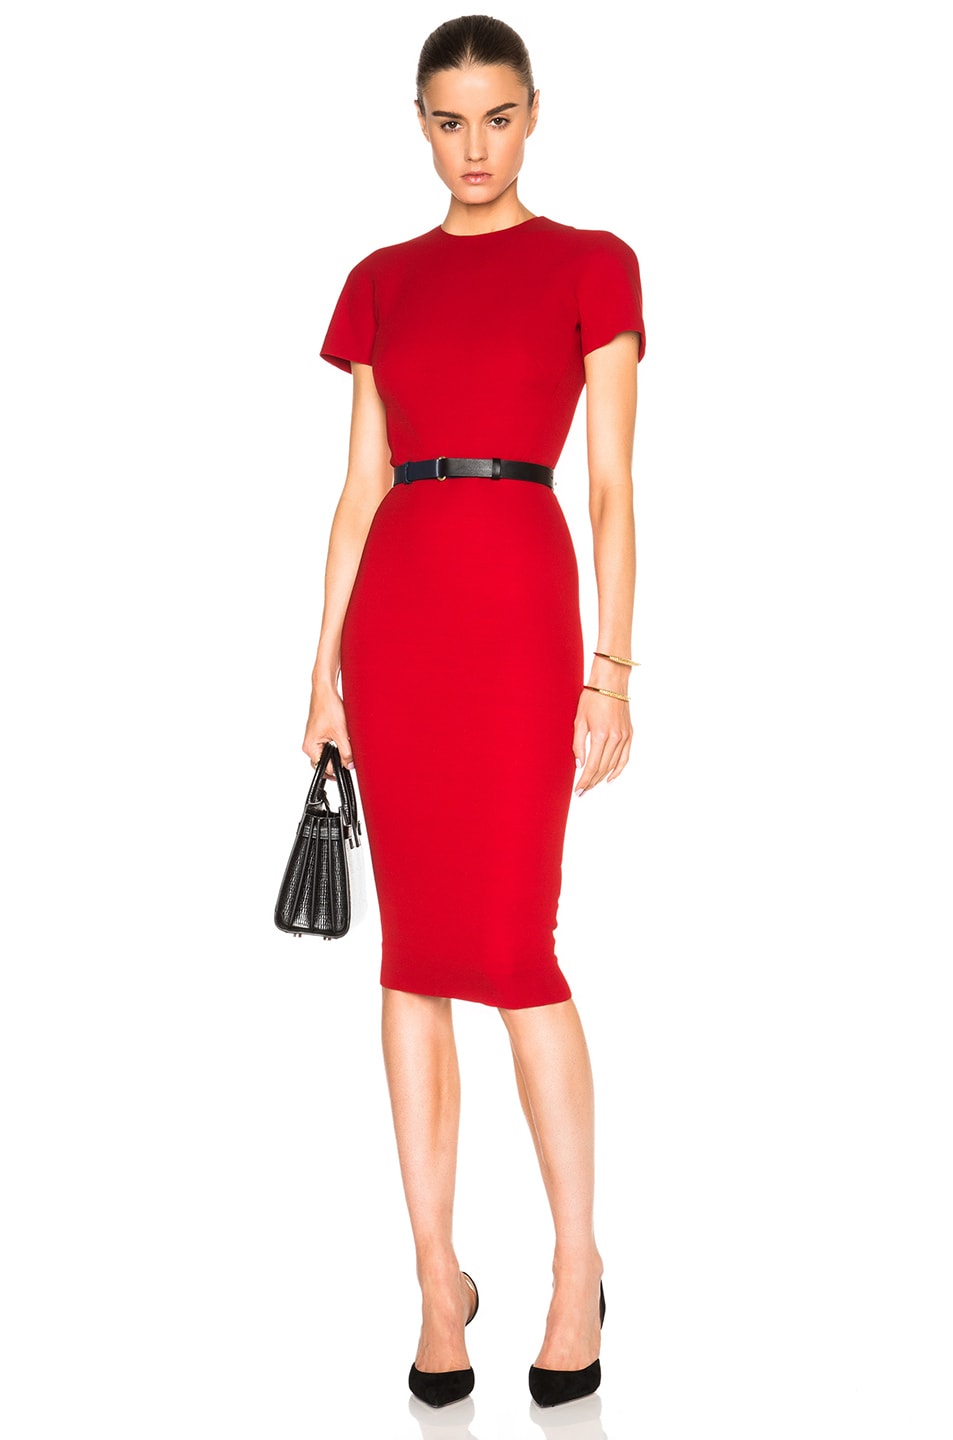 Victoria Beckham Double Crepe T Shirt Fitted Dress in Lipstick Red | FWRD